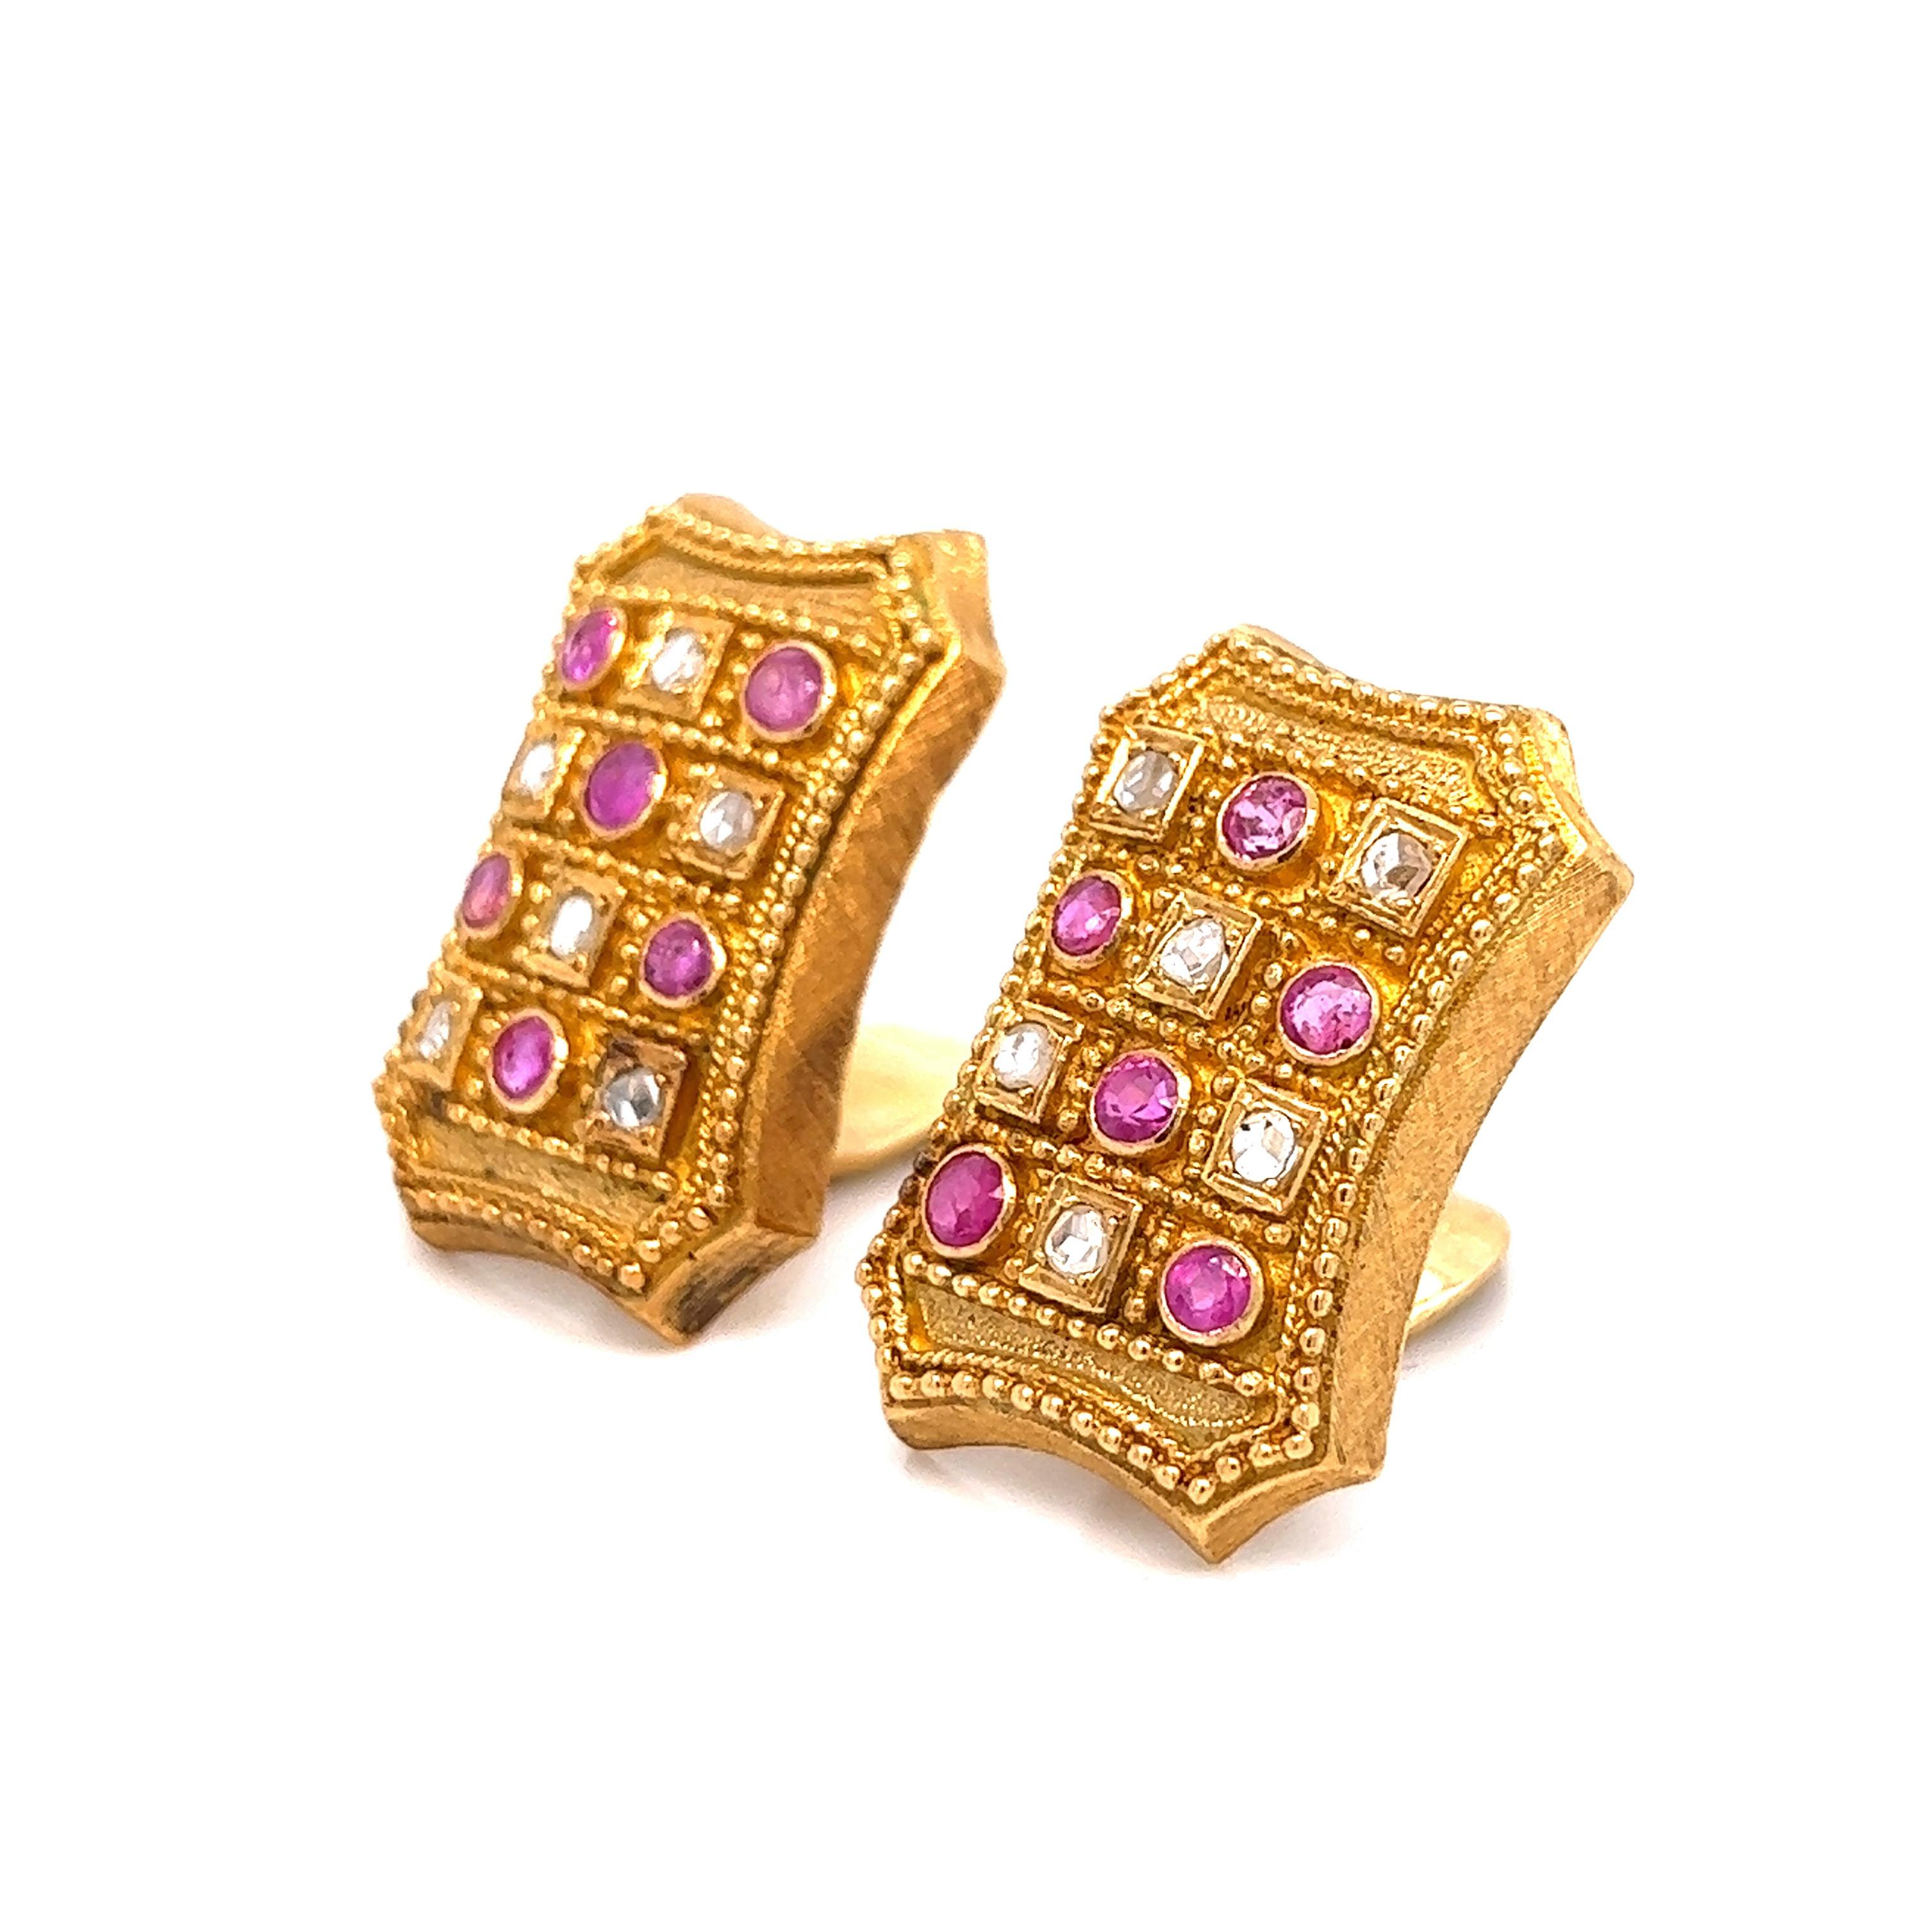 Round Cut Lalaounis Ruby Diamond Gold Ear Clips For Sale